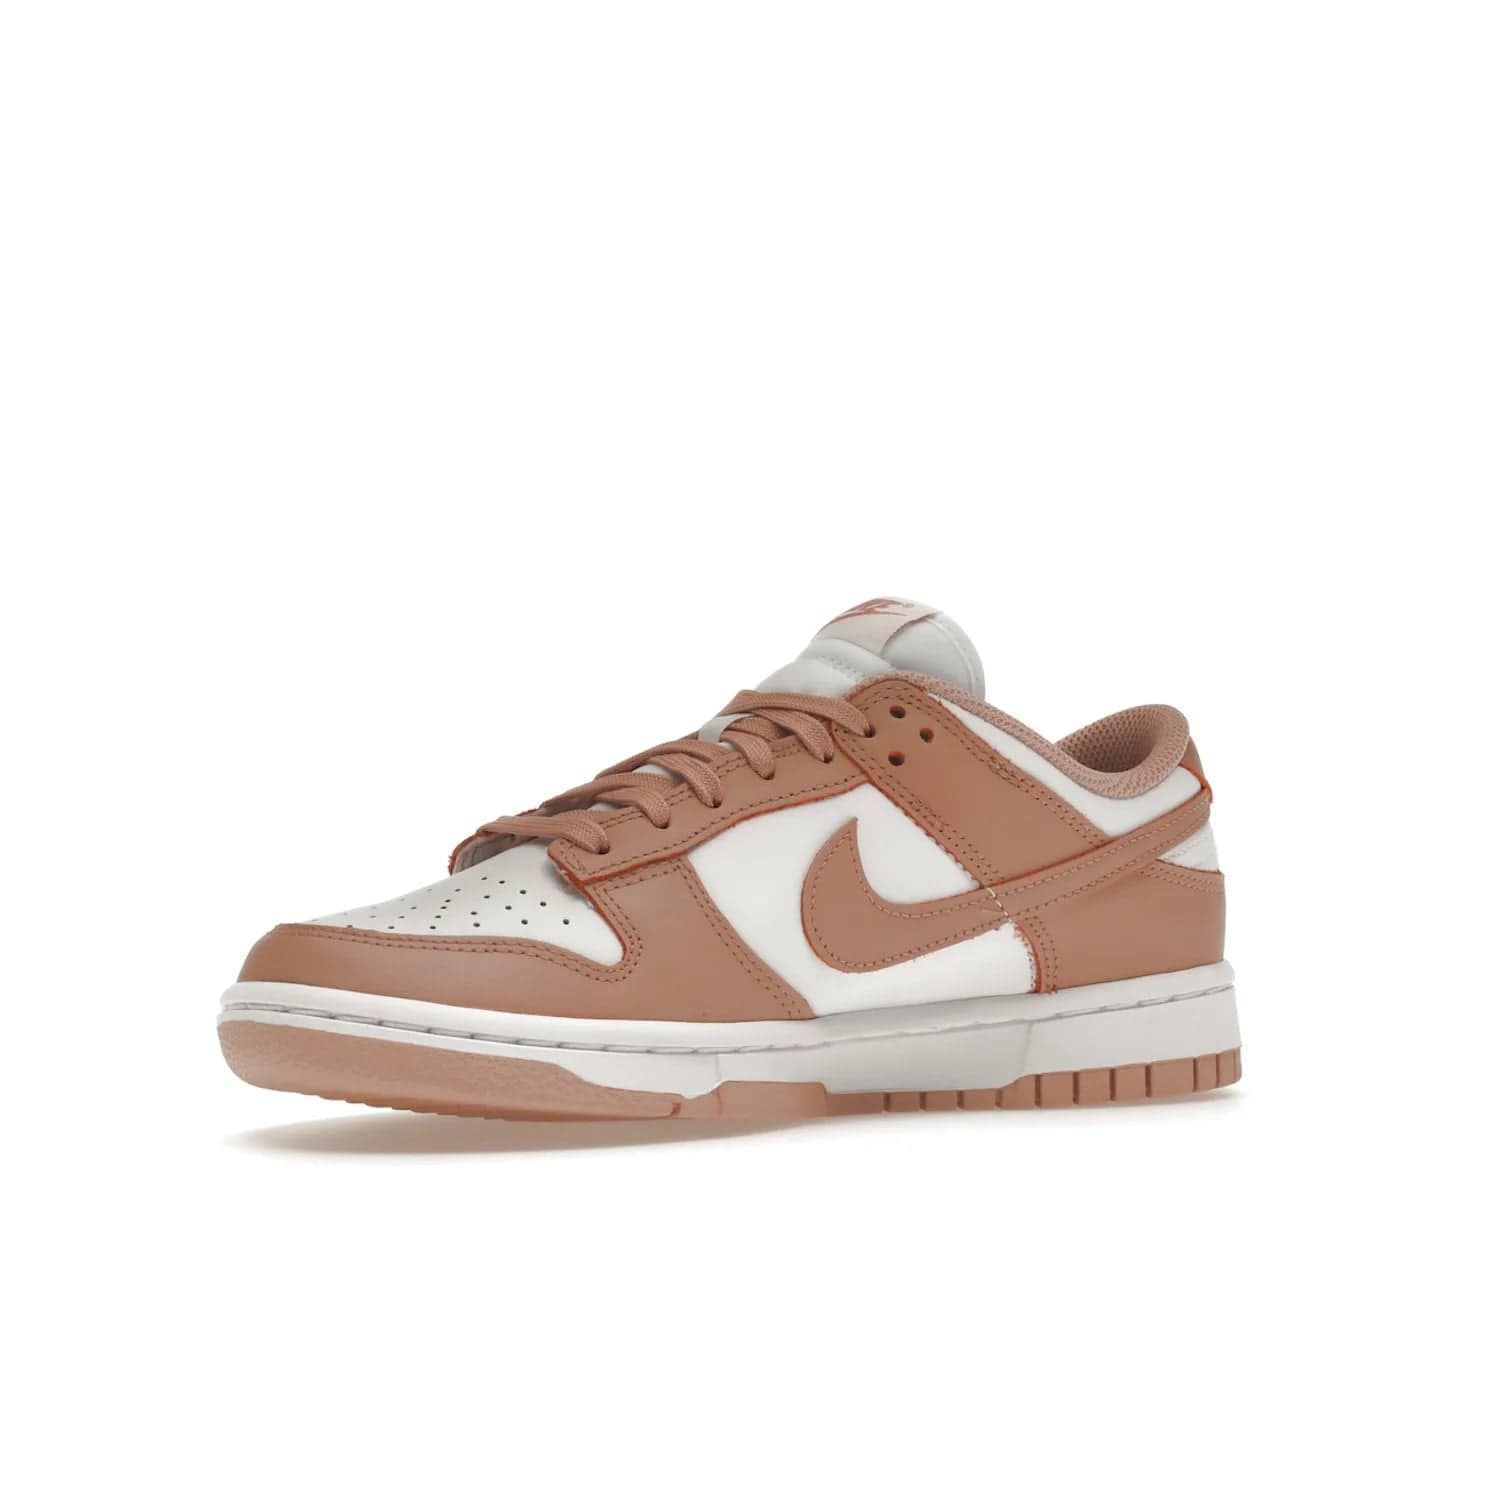 Nike Dunk Low Rose Whisper (Women's) - Image 16 - Only at www.BallersClubKickz.com - The Nike Dunk Low Rose Whisper is the perfect summer shoe with classic two-tone look and vintage-inspired design. Features white and Rose Whisper leather upper, woven tongue labels and EVA foam sole for plush cushioning. Available June 2022 at $100.